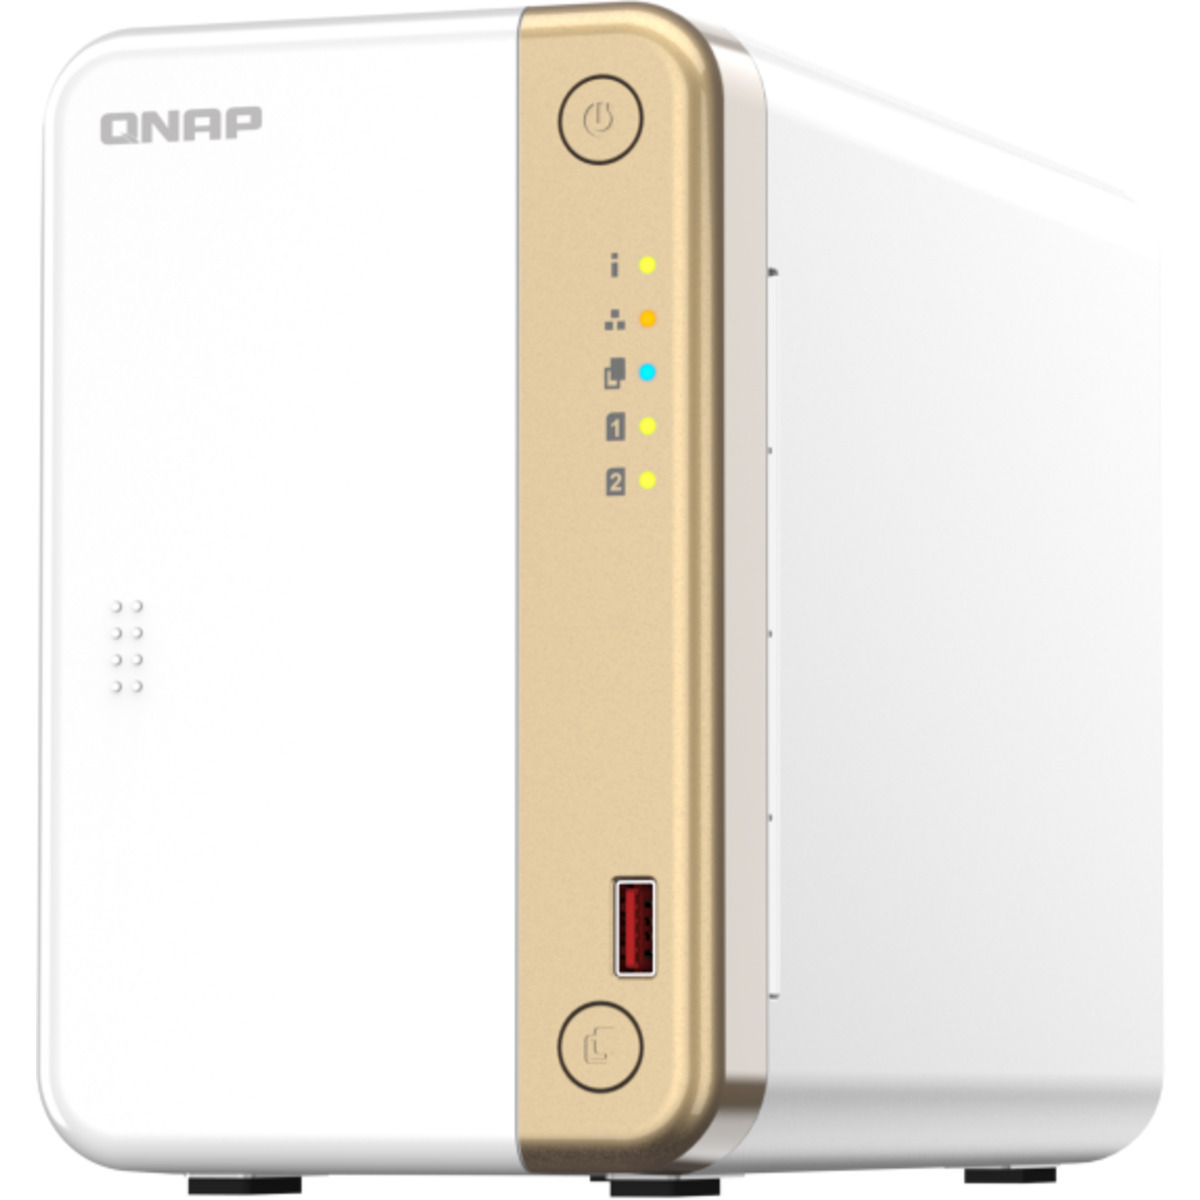 QNAP TS-262 28tb 2-Bay Desktop Personal / Basic Home / Small Office NAS - Network Attached Storage Device 2x14tb Toshiba Enterprise Capacity MG07ACA14TE 3.5 7200rpm SATA 6Gb/s HDD ENTERPRISE Class Drives Installed - Burn-In Tested TS-262